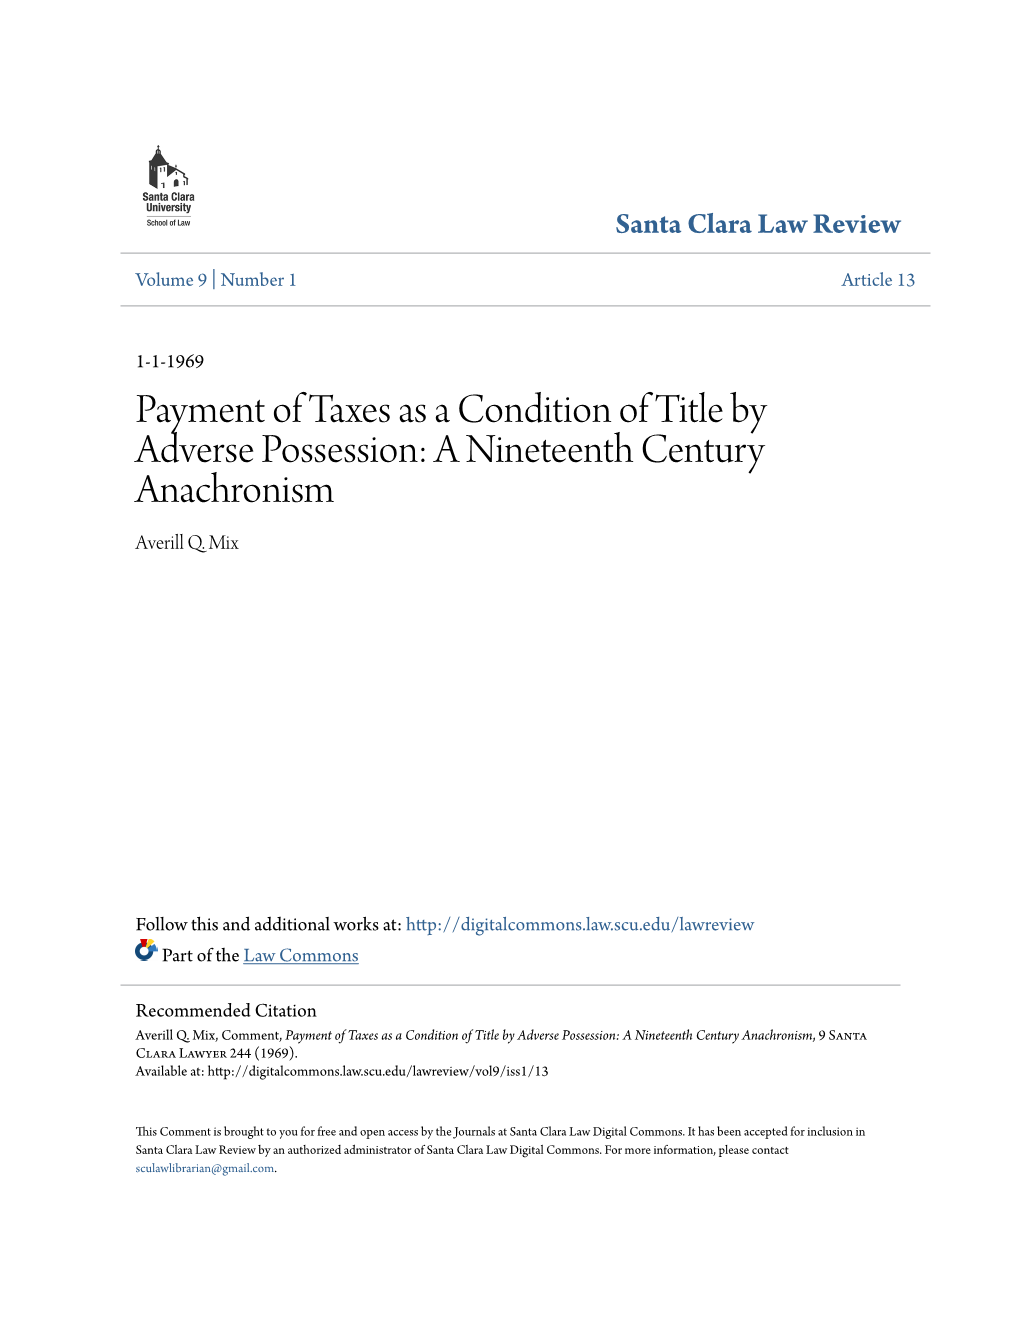 Payment of Taxes As a Condition of Title by Adverse Possession: a Nineteenth Century Anachronism Averill Q